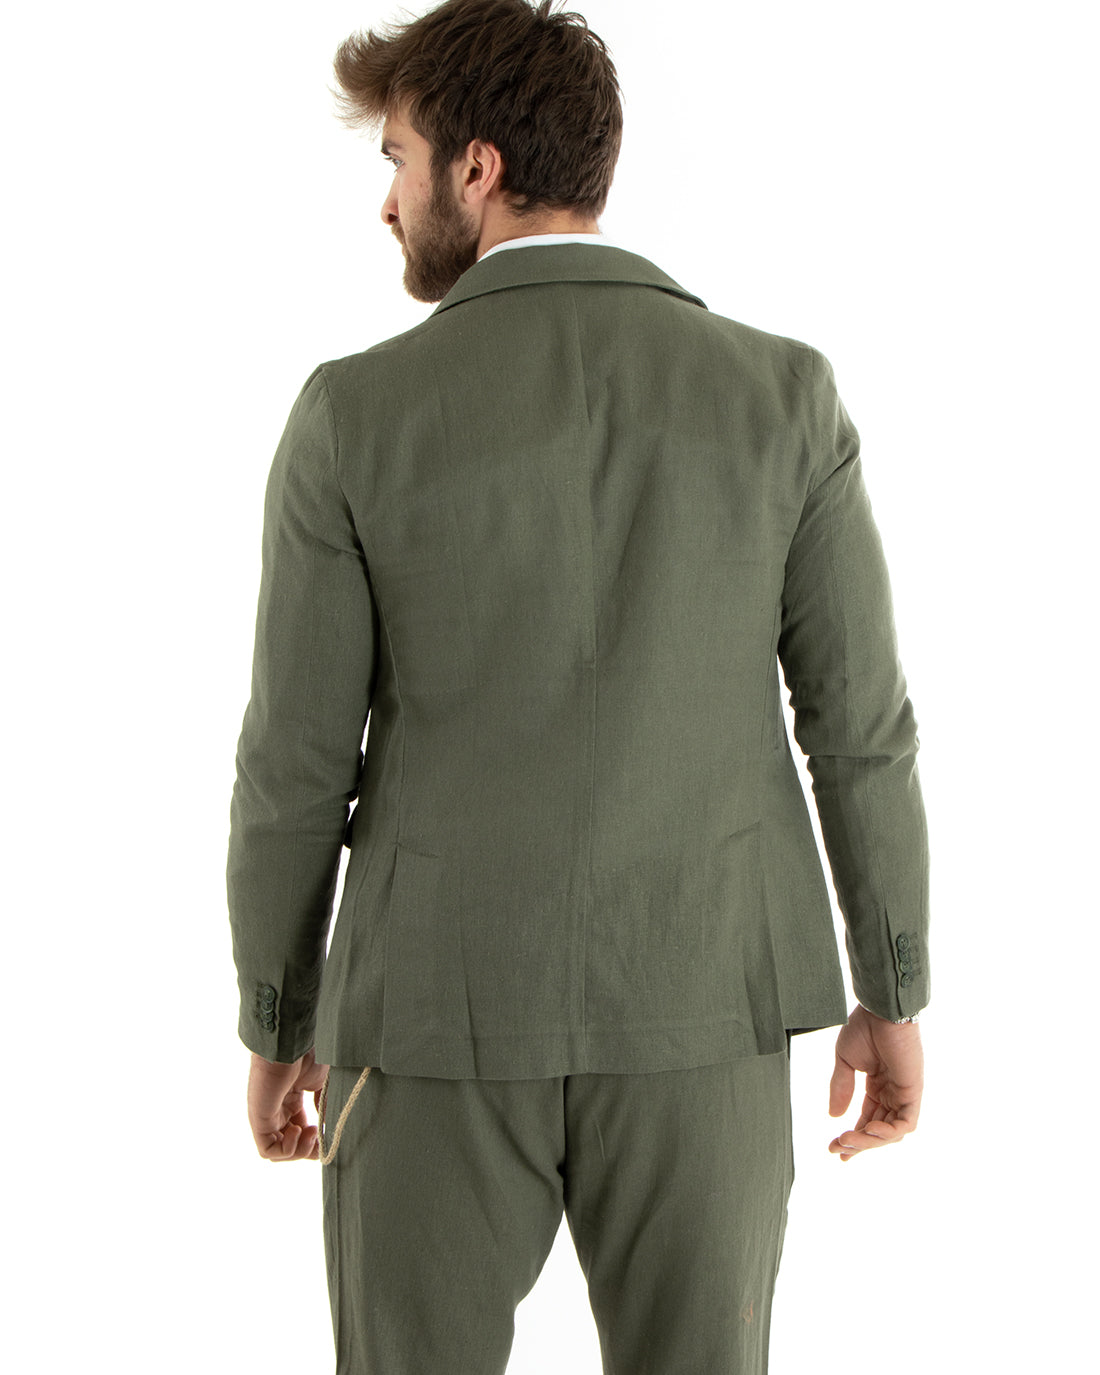 Single-breasted men's suit, tailored linen suit, jacket, trousers, solid color, green GIOSAL-OU2323A